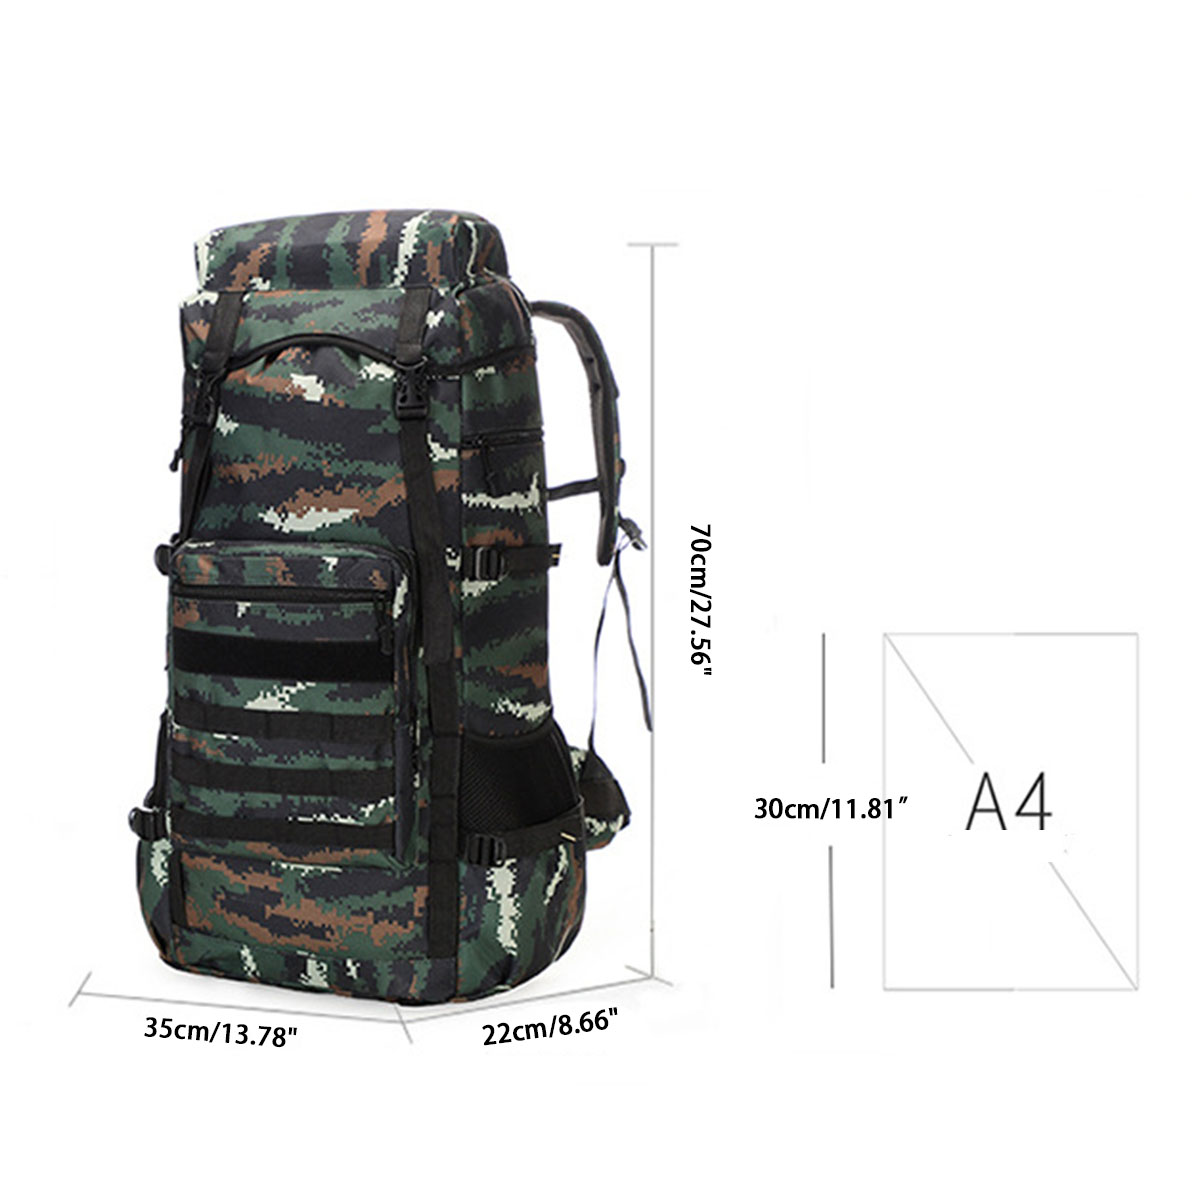 70L-Outdoor-Waterproof-Military-Tactical-Backpack-Camping-Hiking-Backpack-Trekking-Camouflage-Travel-1759458-5